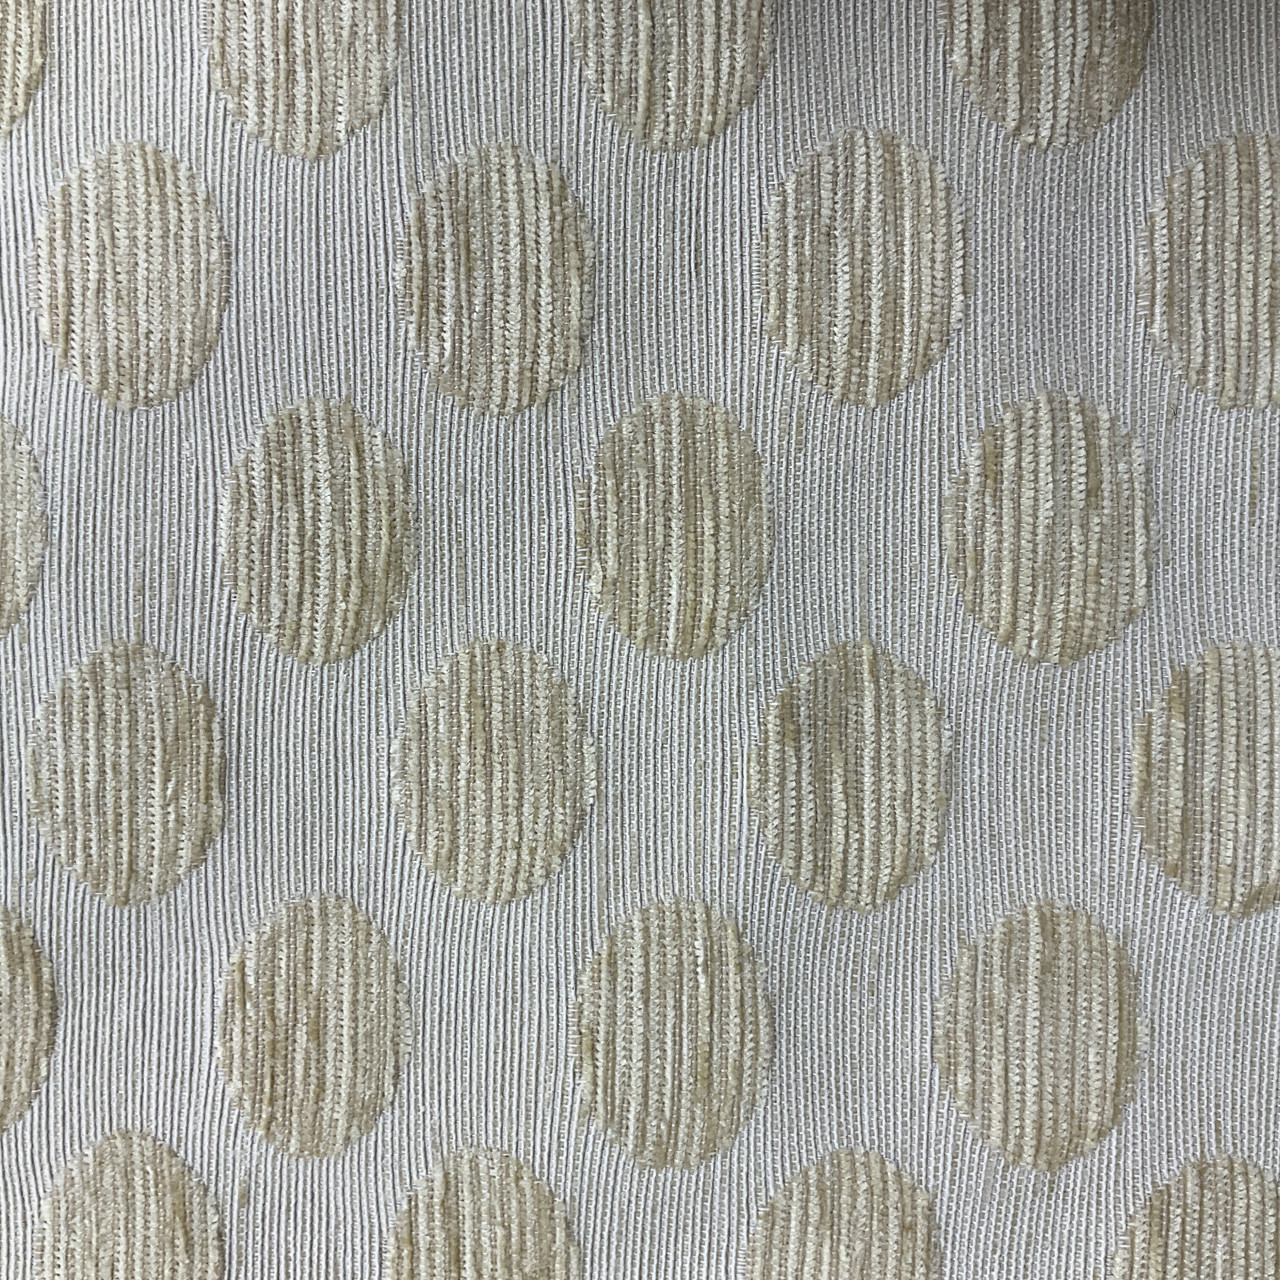 Splendid - Textured Chenille Upholstery Fabric by the Yard